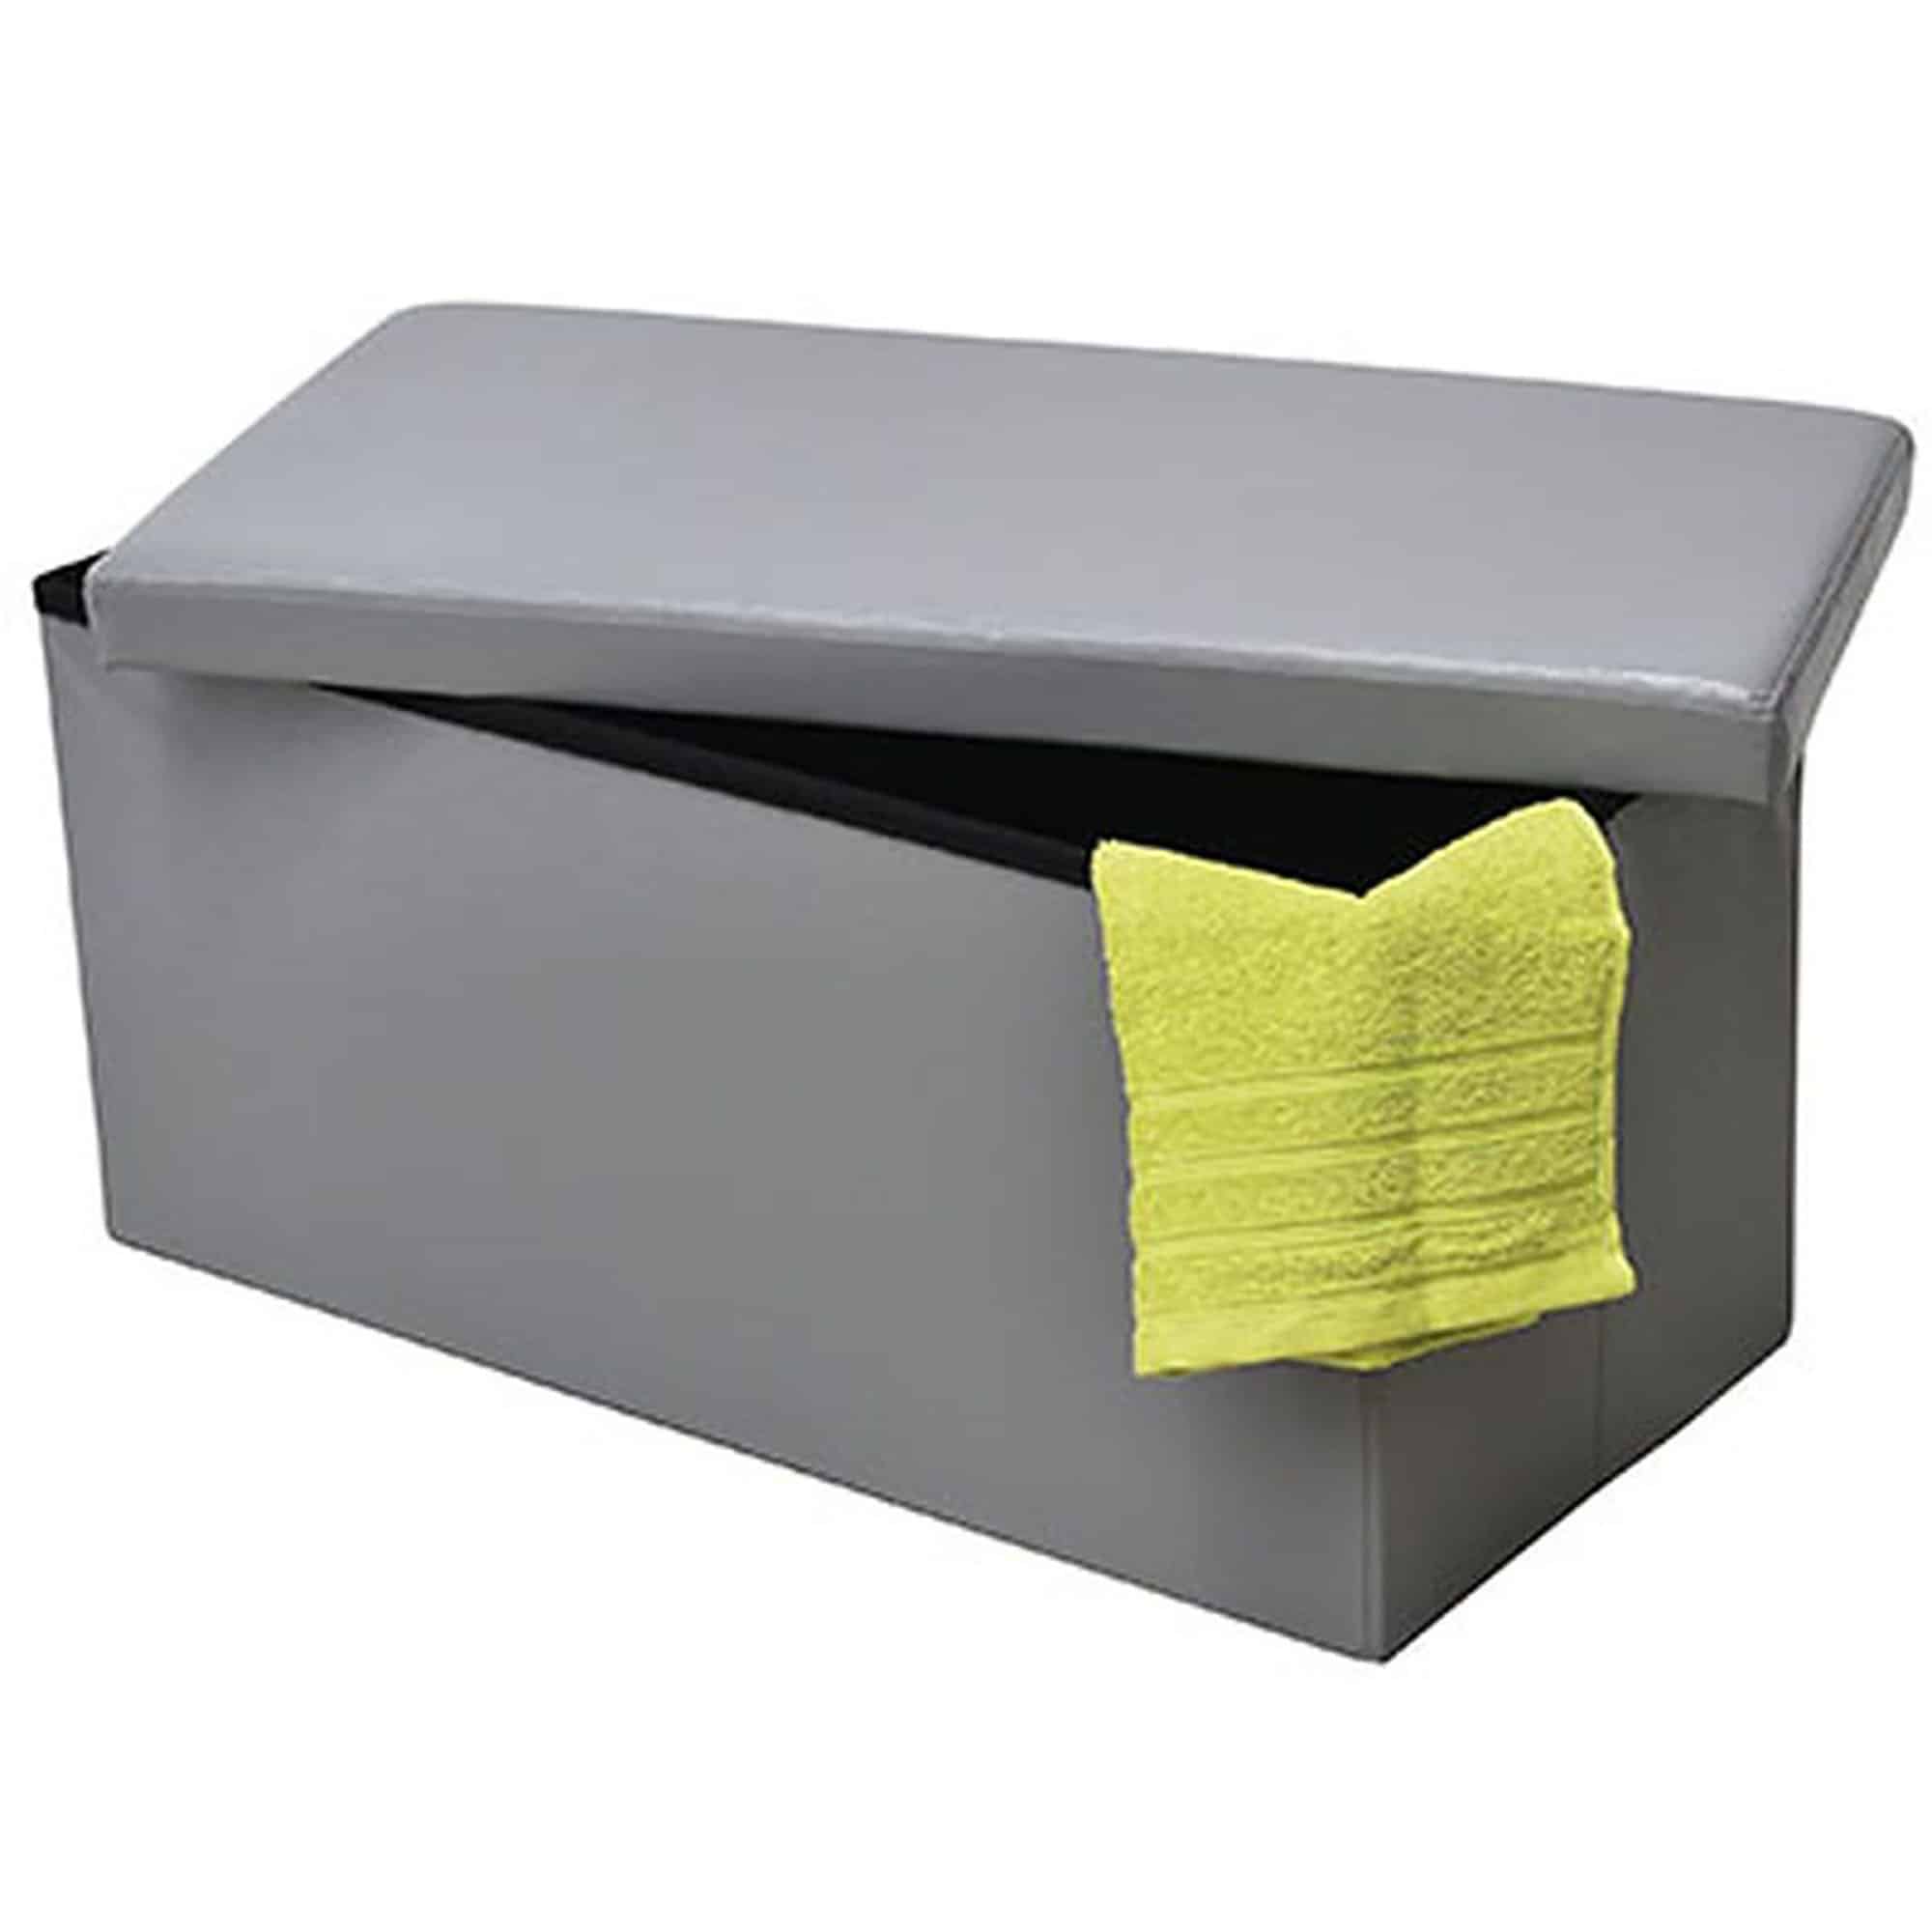 2 in 1 Folding Storage Ottoman Bench Faux Leather